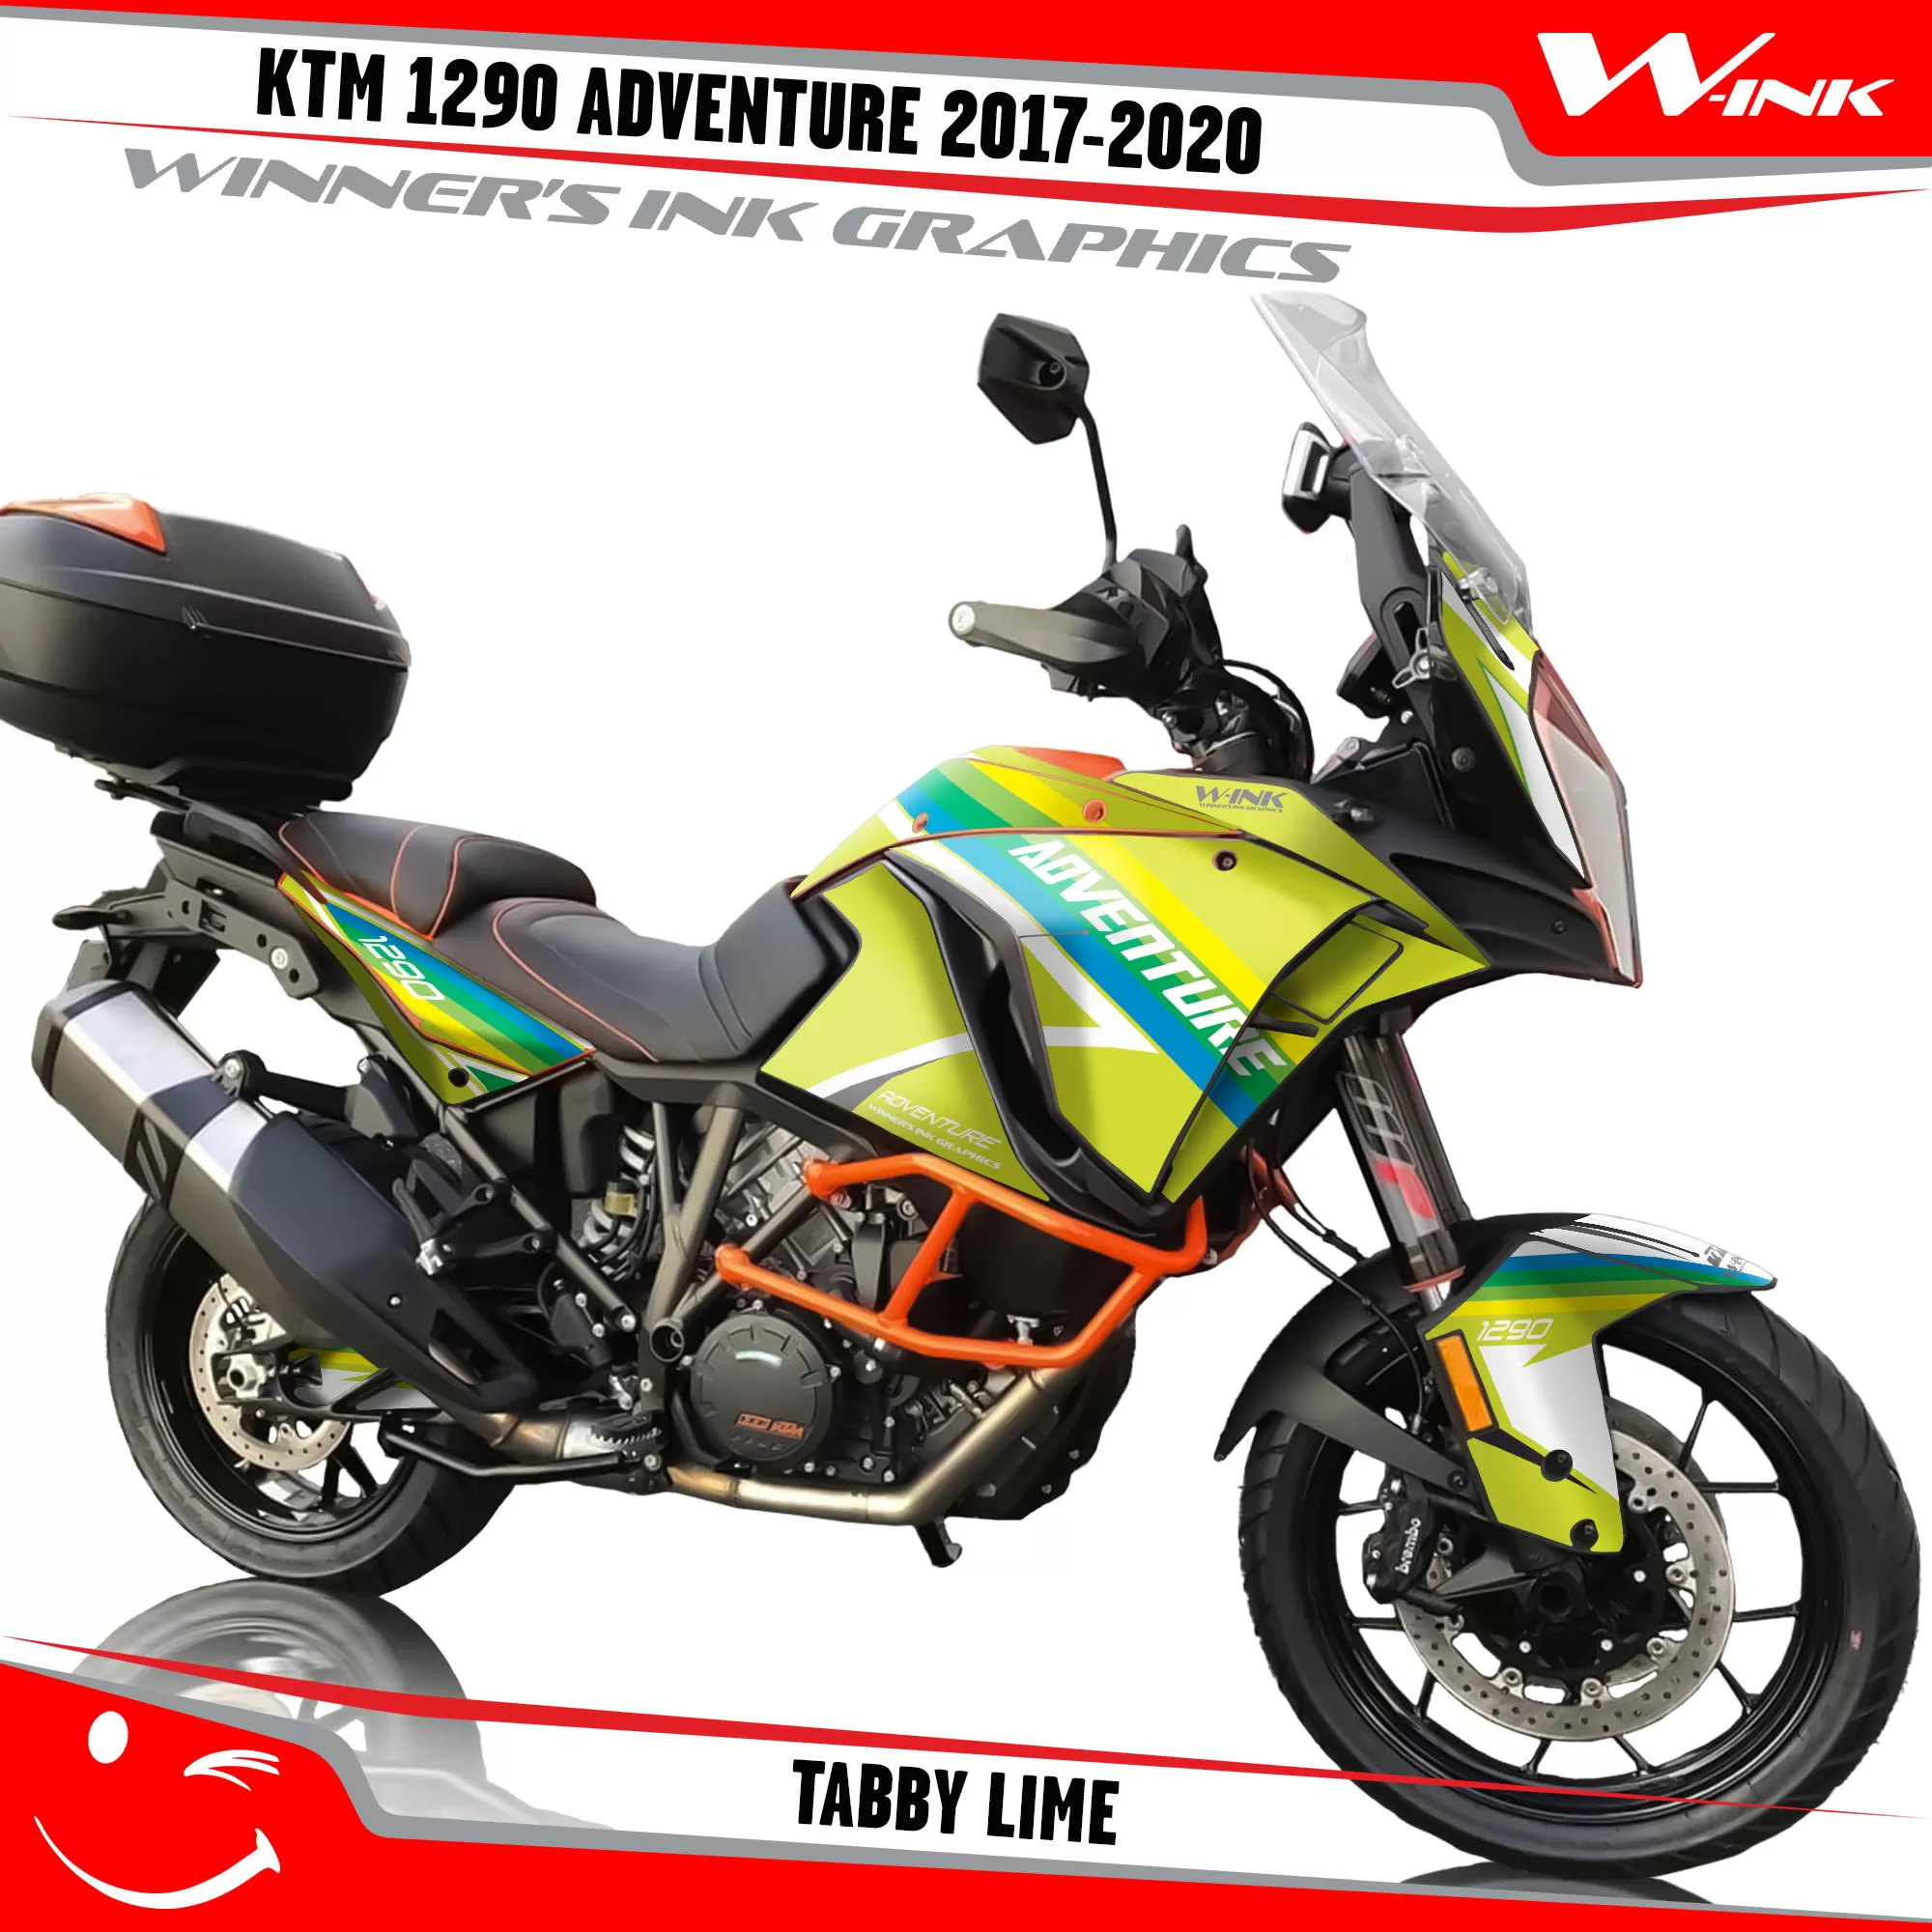 KTM-Adventure-1290-2017-2018-2019-2020-graphics-kit-and-decals-Tabby-Lime